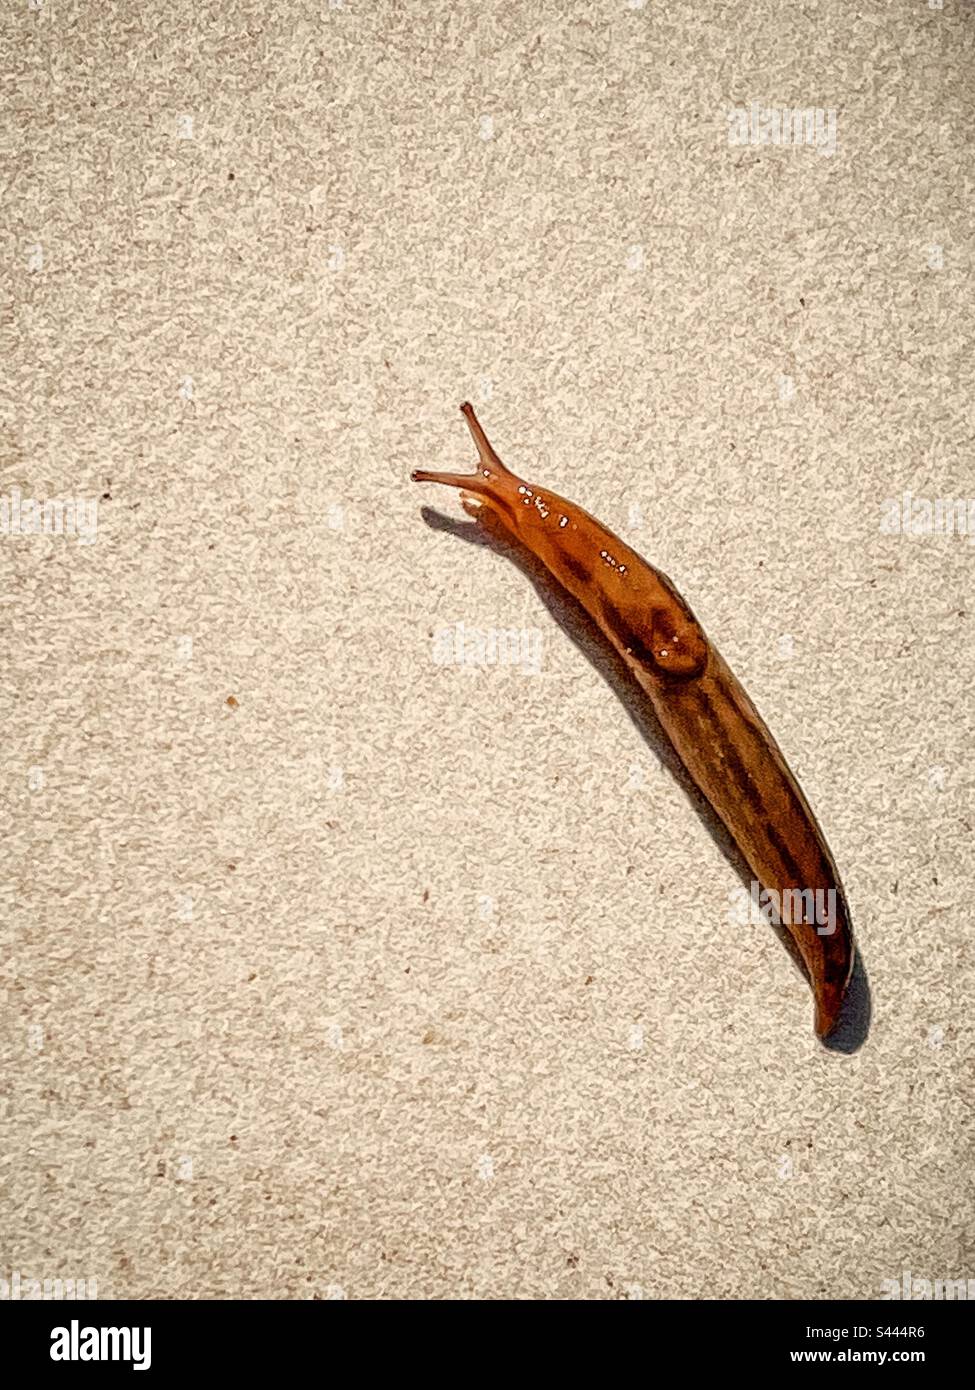 Homeless snail. Snail without a shell. High angle view of slug on tile. Stock Photo